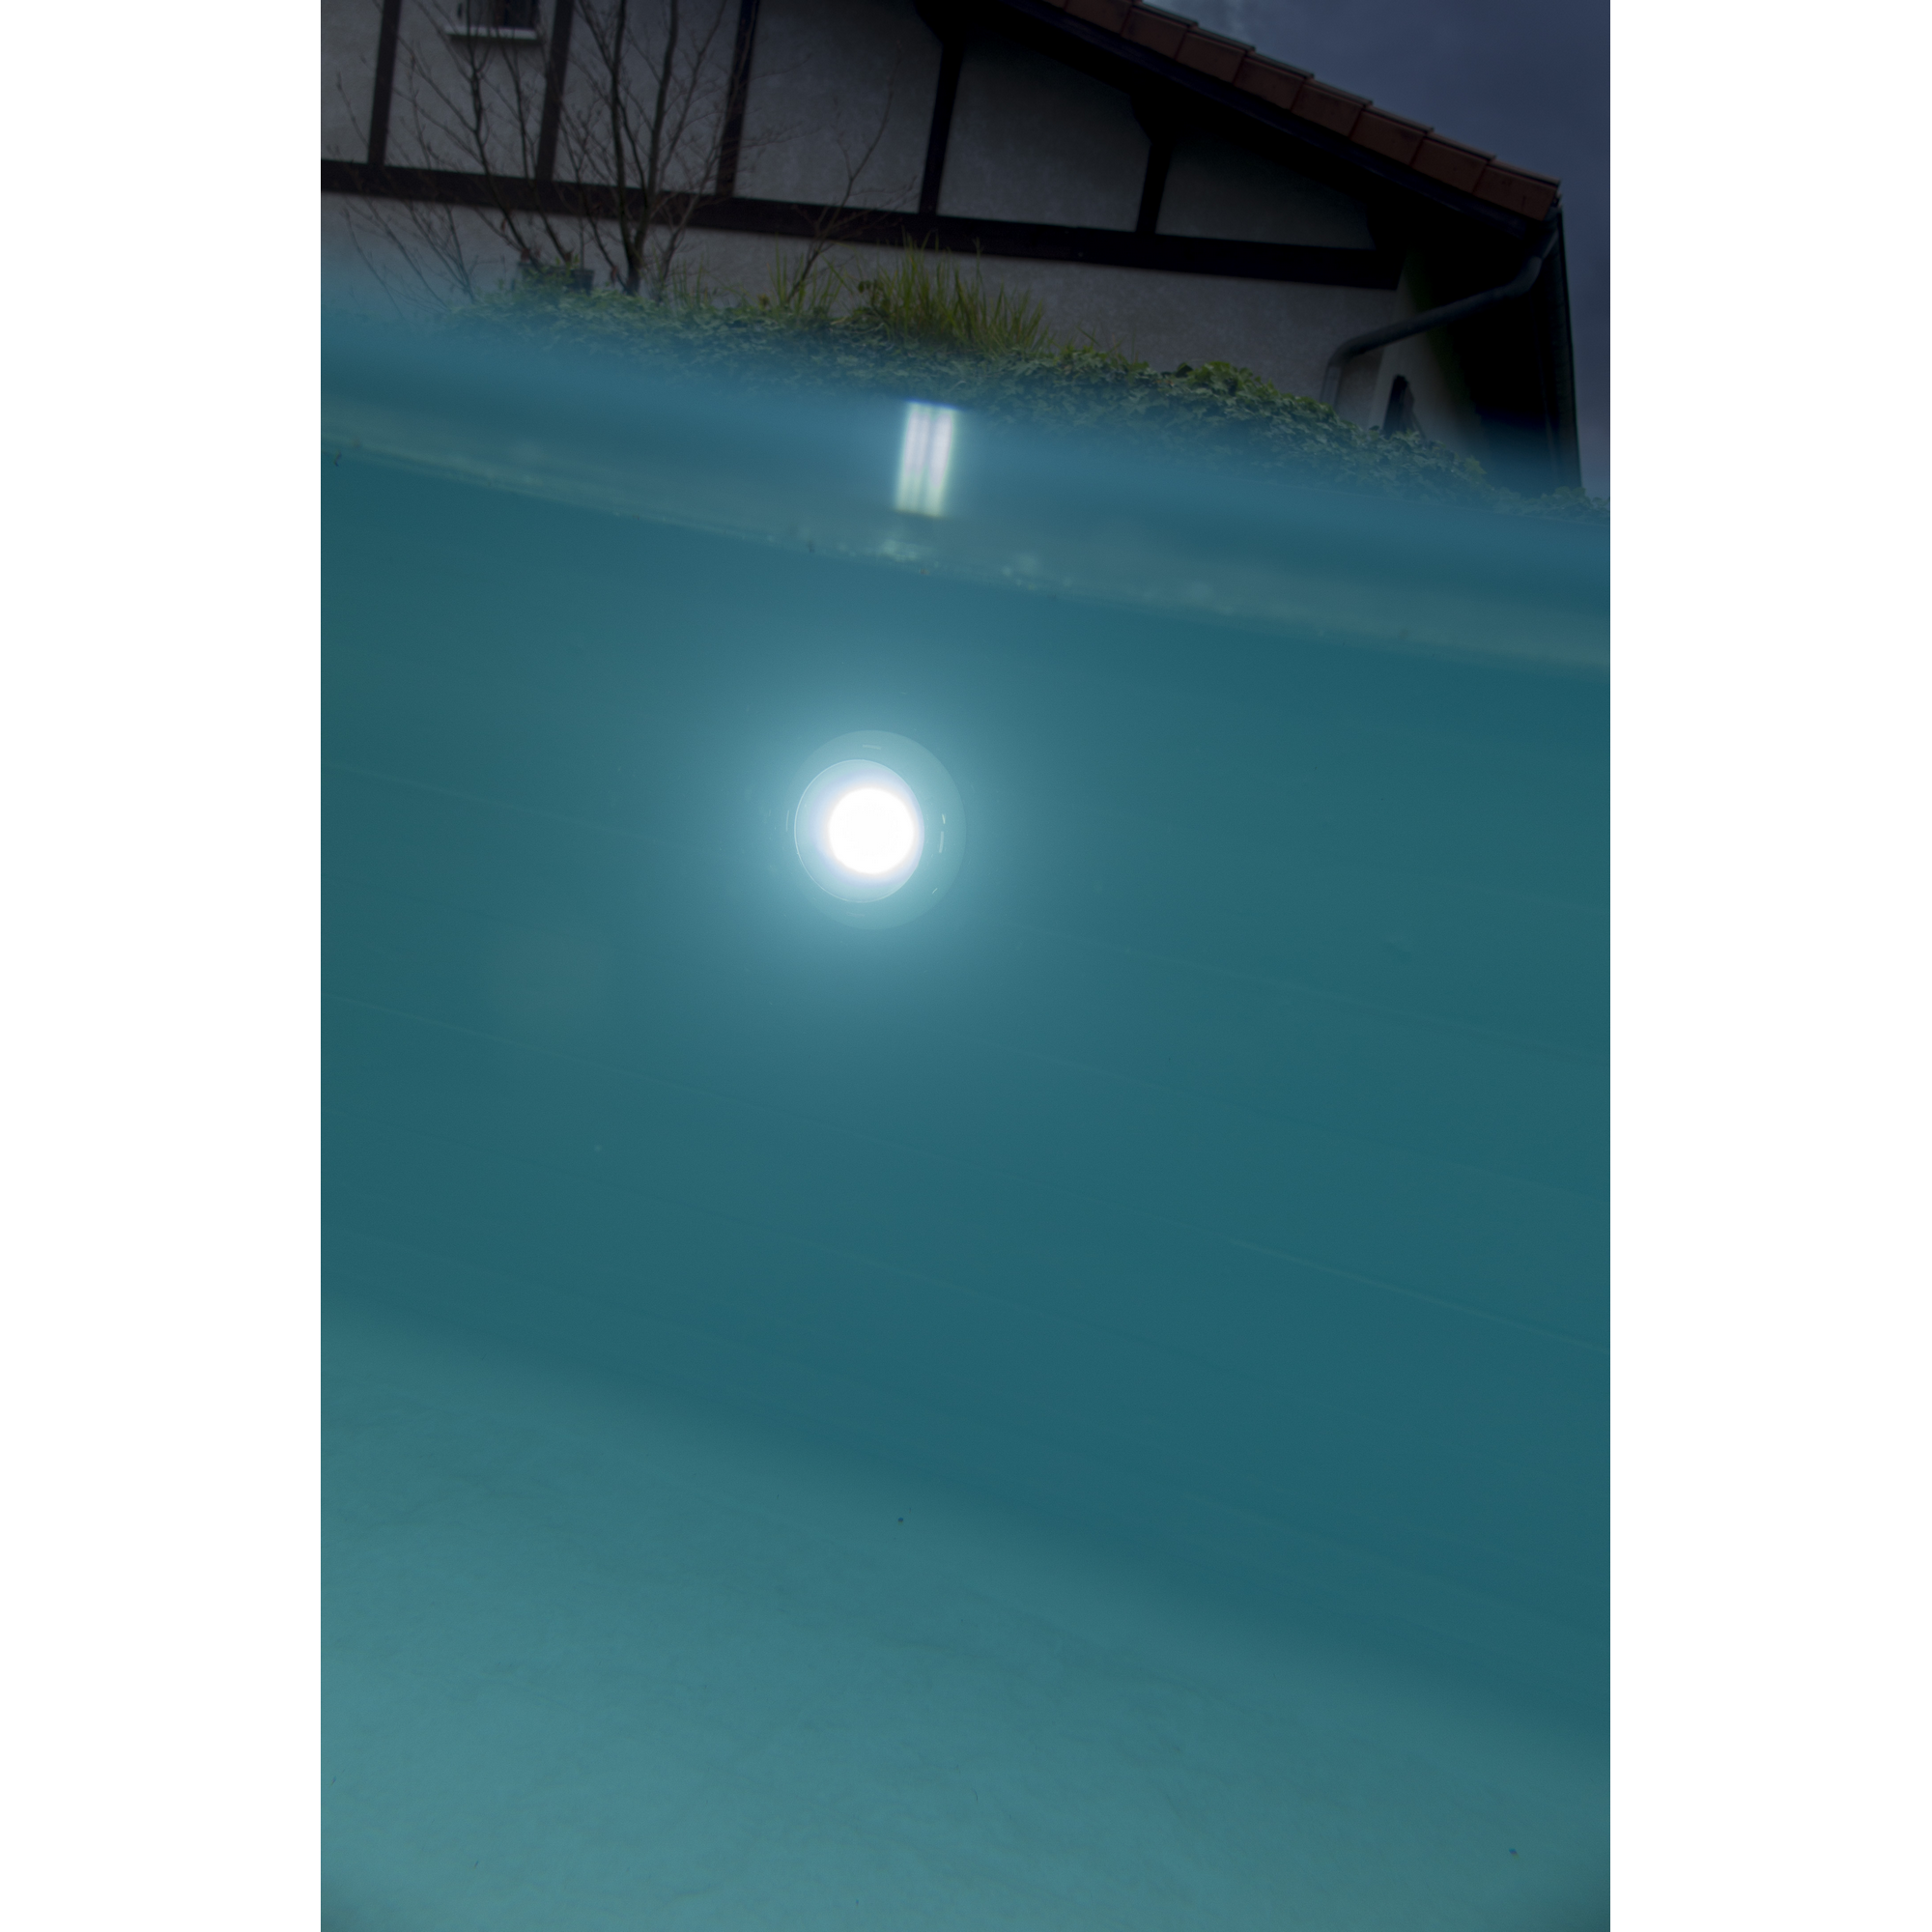 LED-Poolbeleuchtung für Holzpools und Pool 'Composite' weiß Ø 22 x 4 cm + product picture